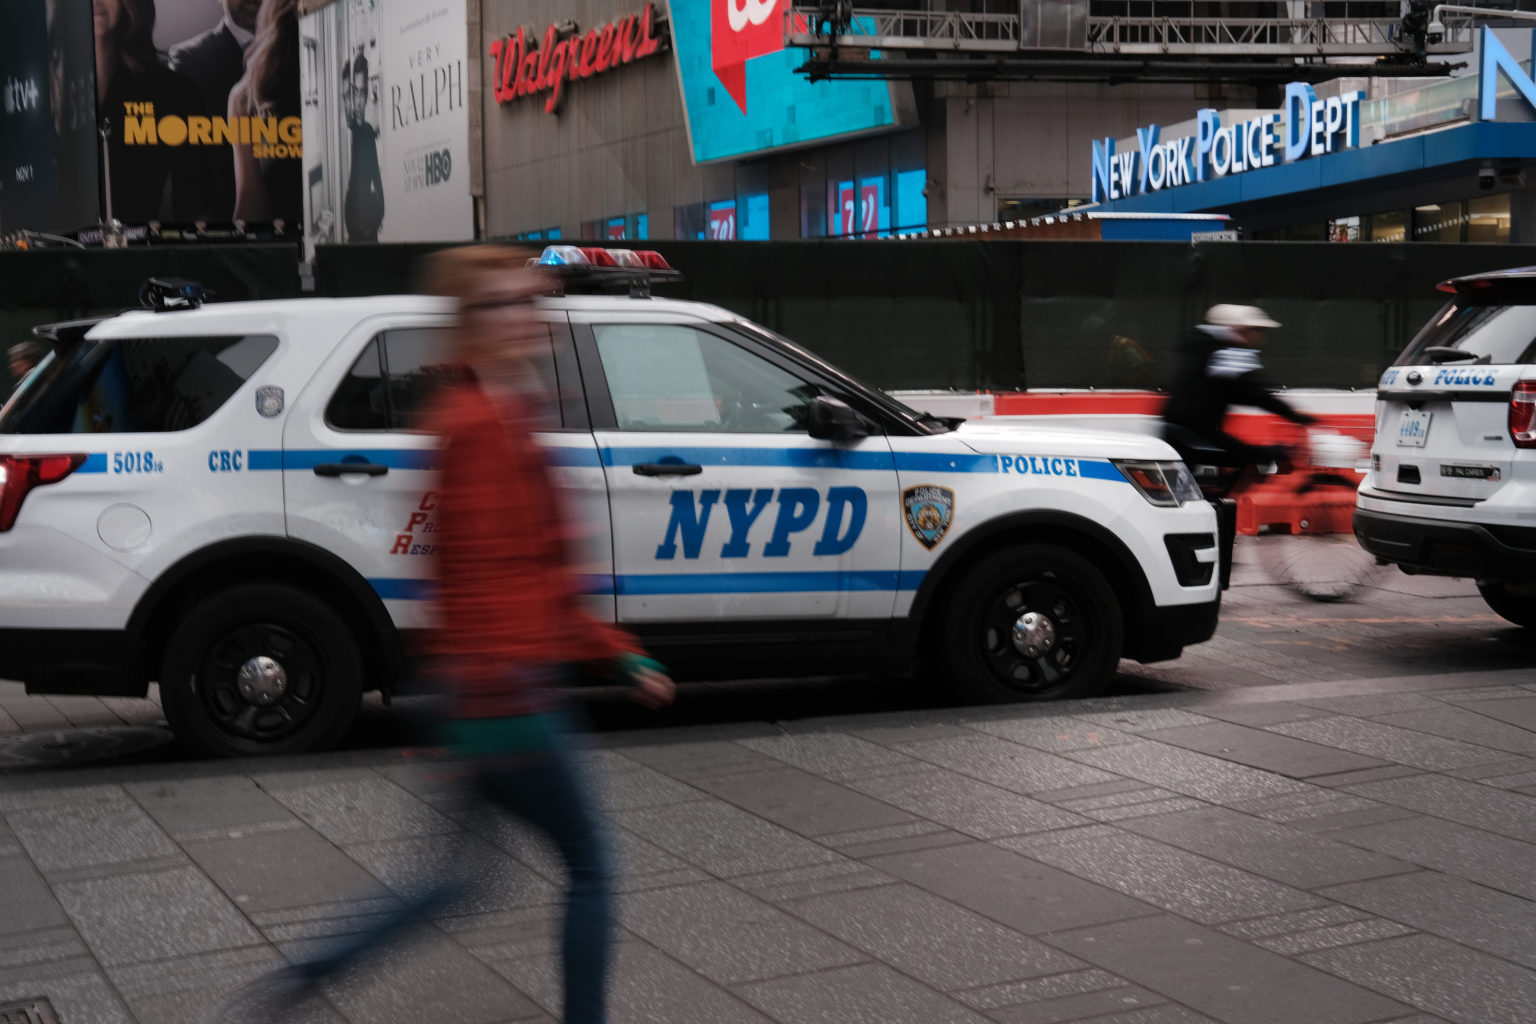 Shooting Leads To Police Car Chase In New York City | The Daily Caller